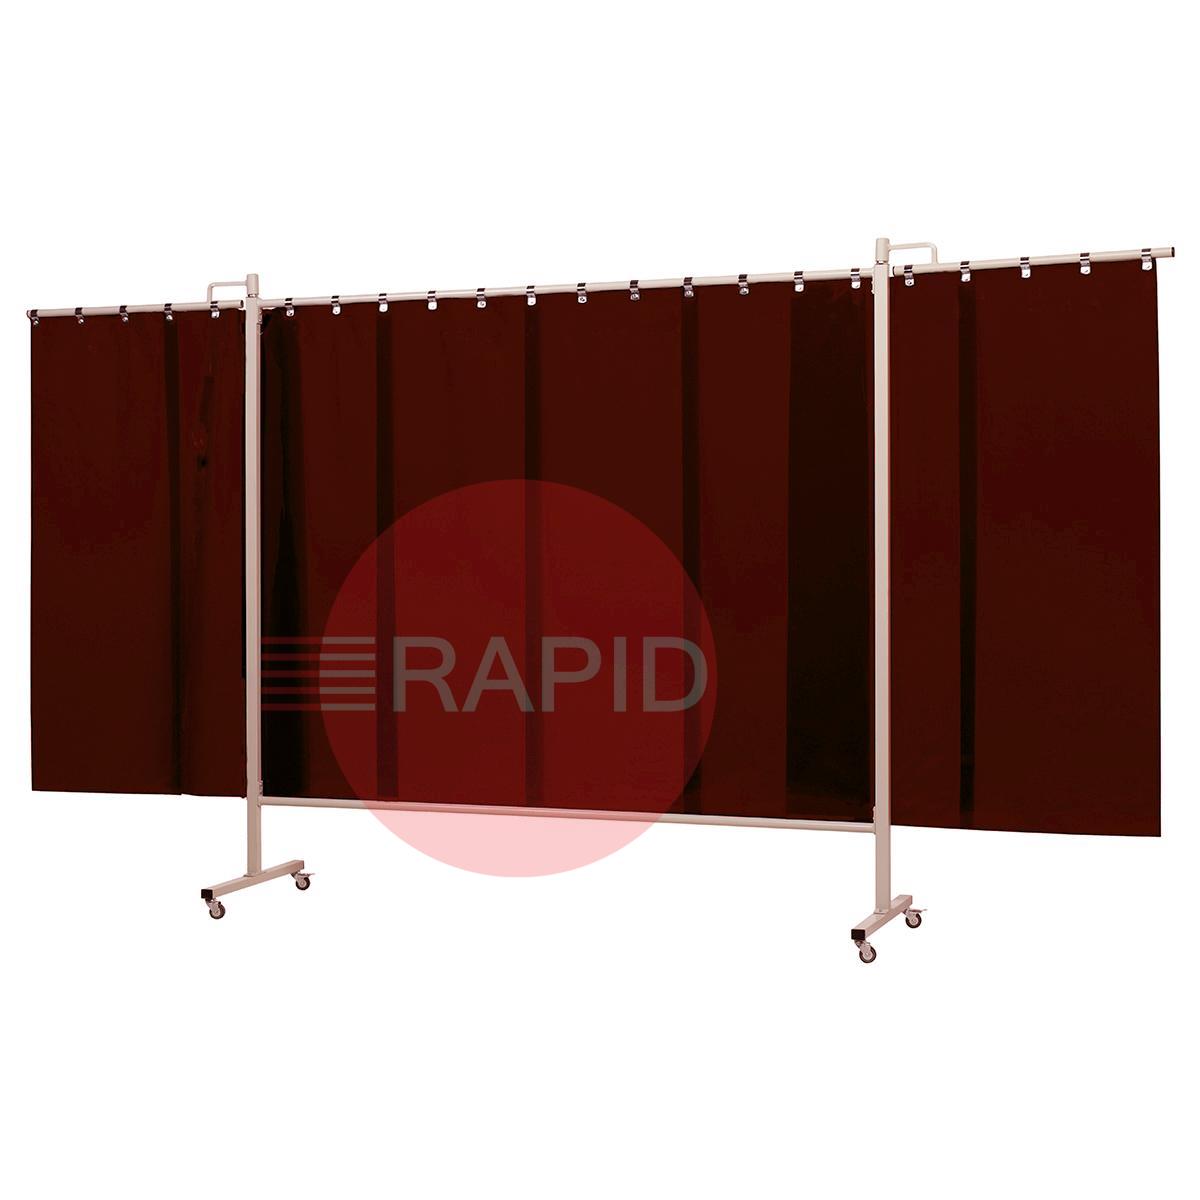 36.36.07  CEPRO Omnium Triptych Welding Screen, with Bronze-CE Sheet - 3.7m Wide x 2m High, Approved EN 25980